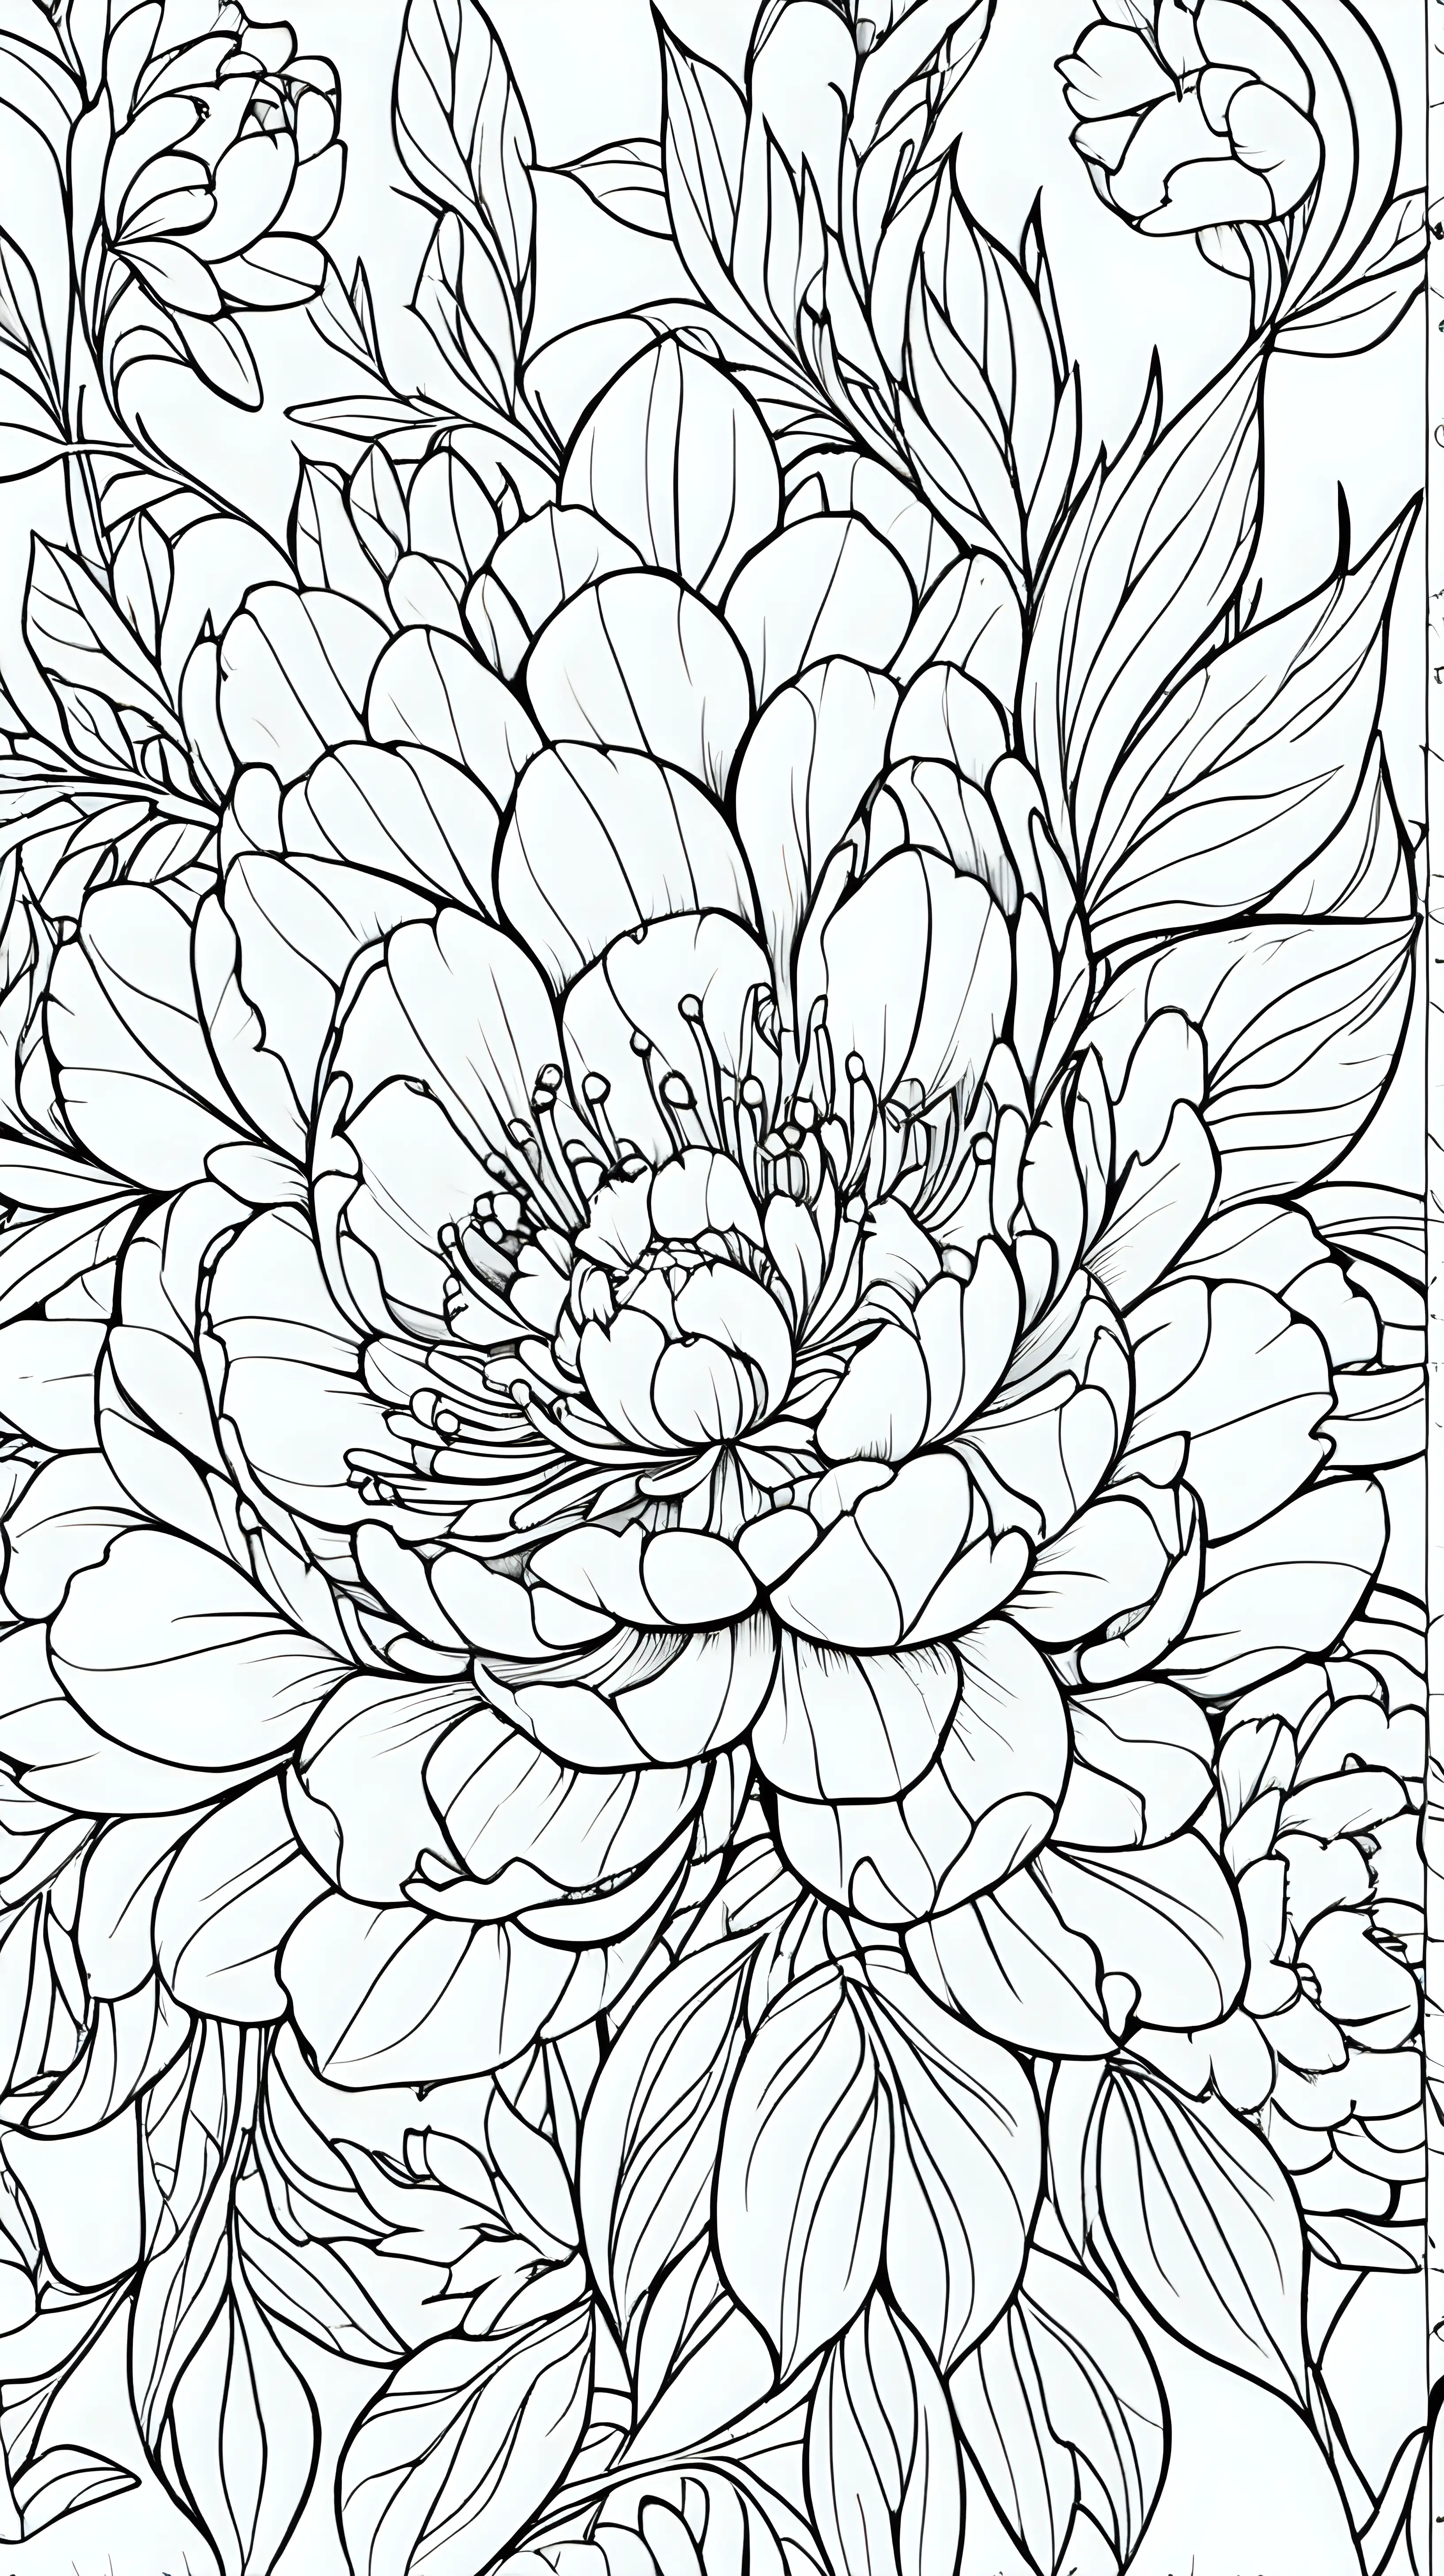 coloring book image, thin black lines, patterned floral mandala pattern, peony